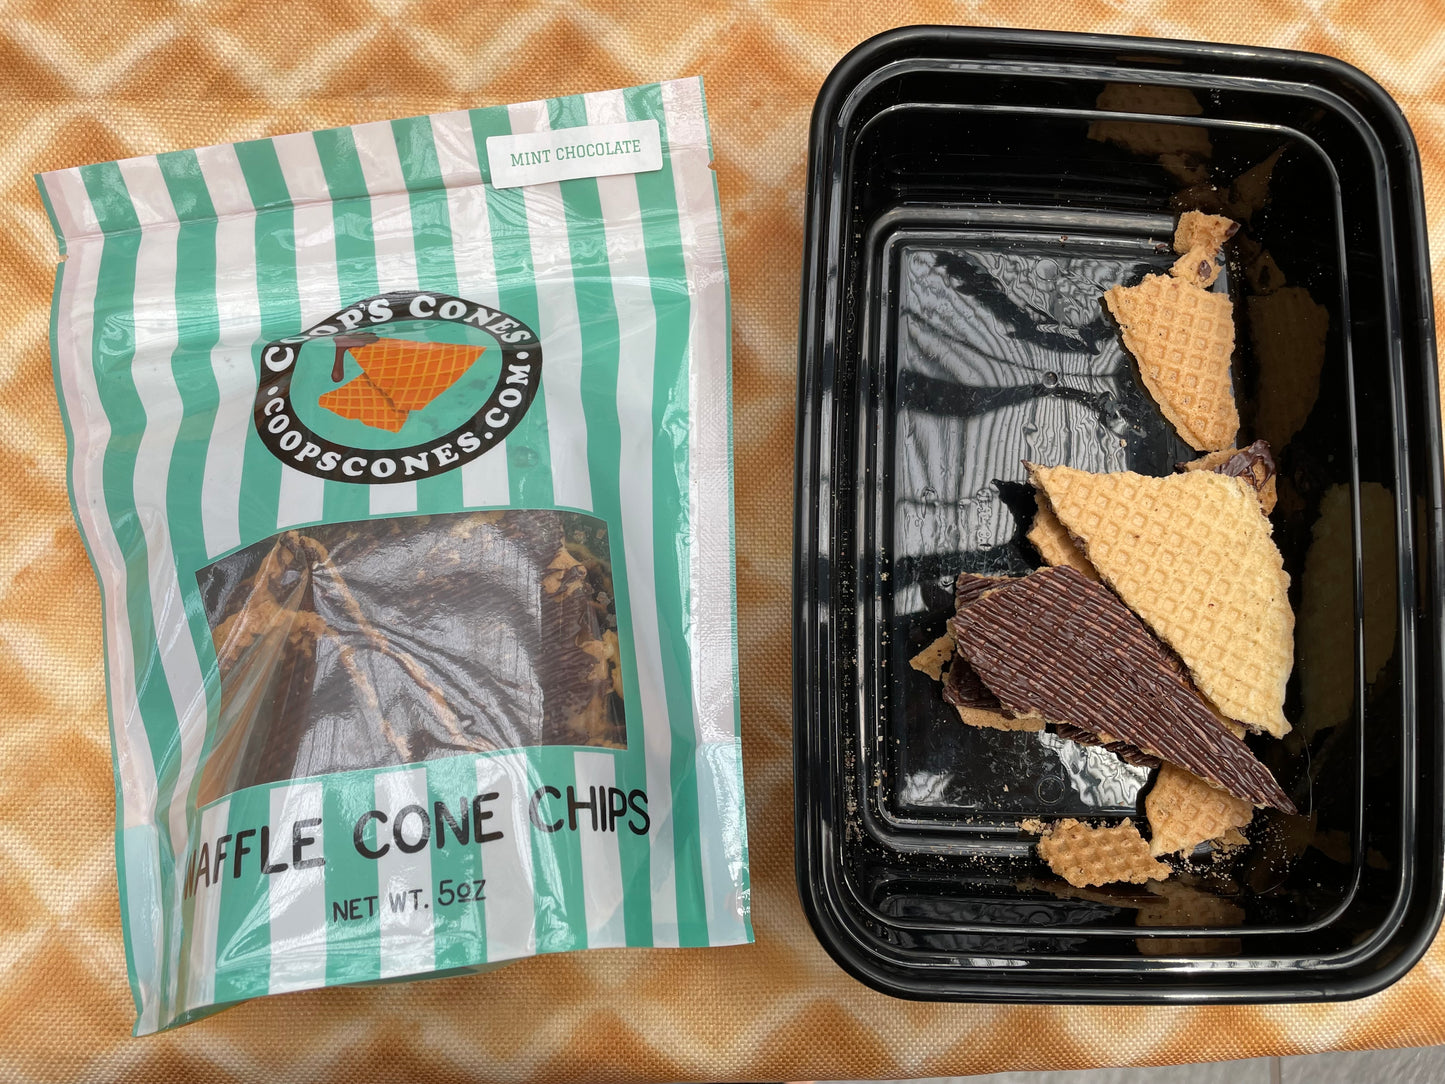 Coop's mint chocolate waffle cone chips